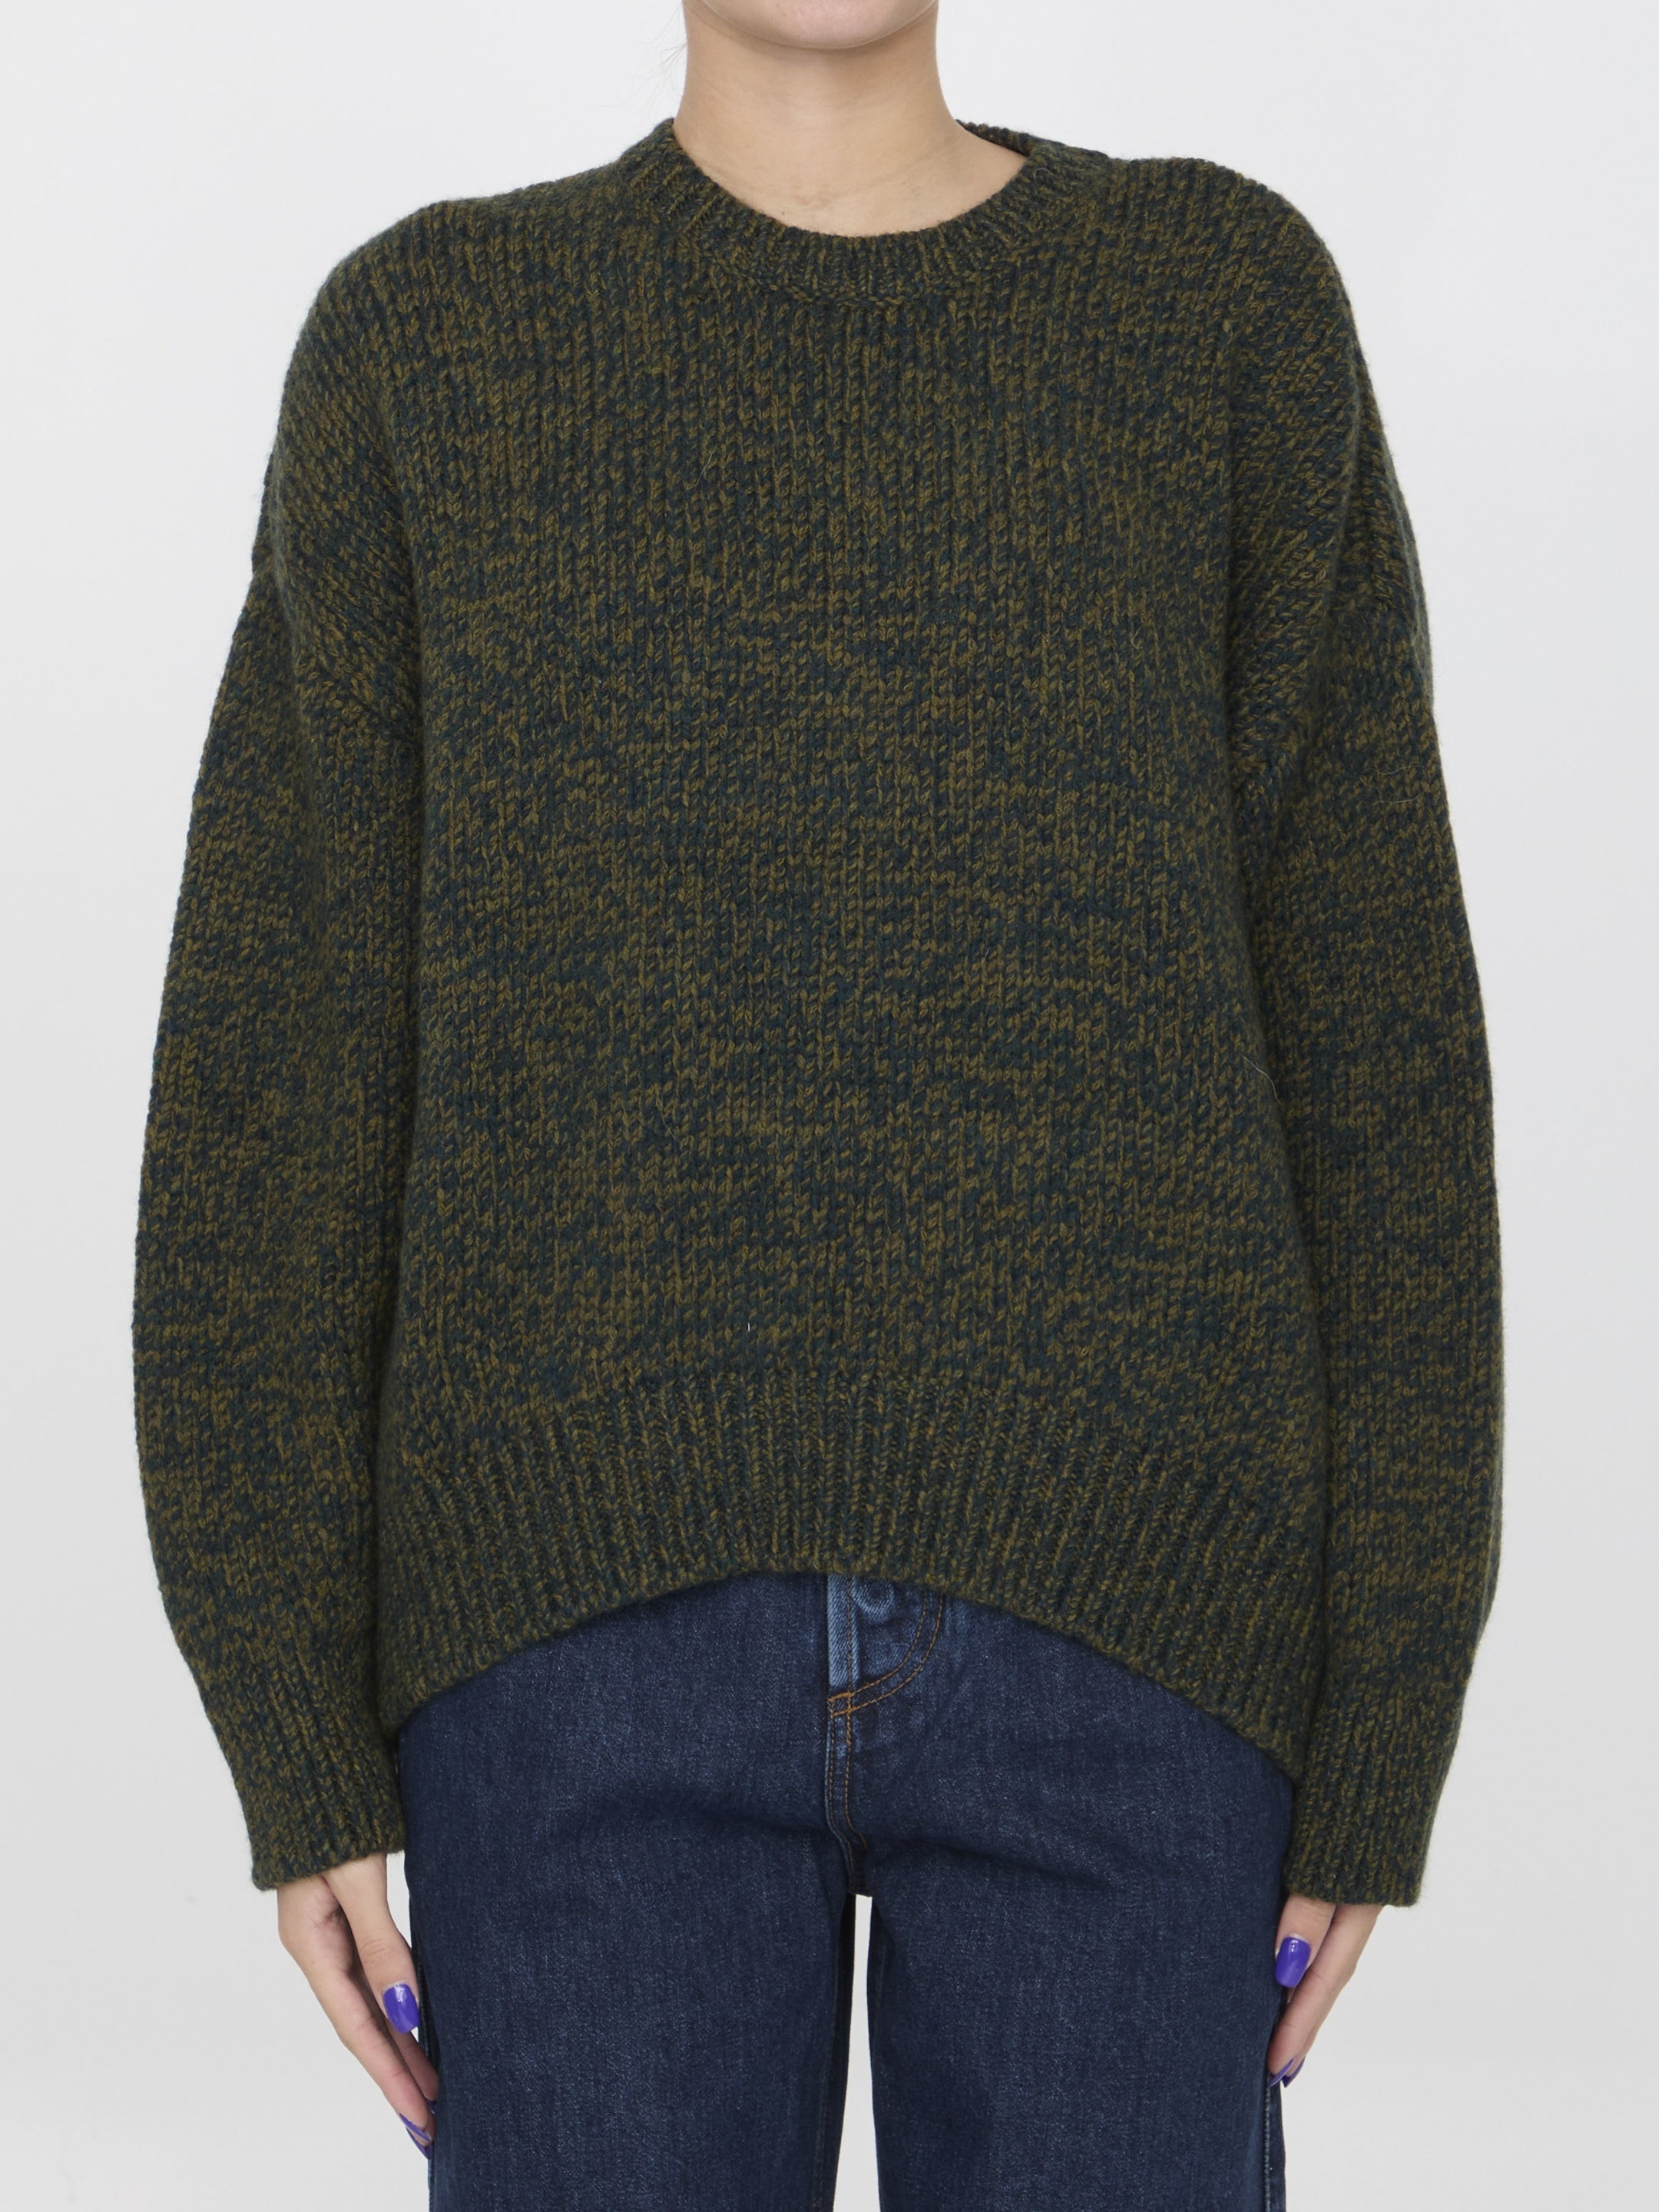 LOEWE-OUTLET-SALE-Trompe-loeil-sweater-Strick-S-GREEN-ARCHIVE-COLLECTION.jpg